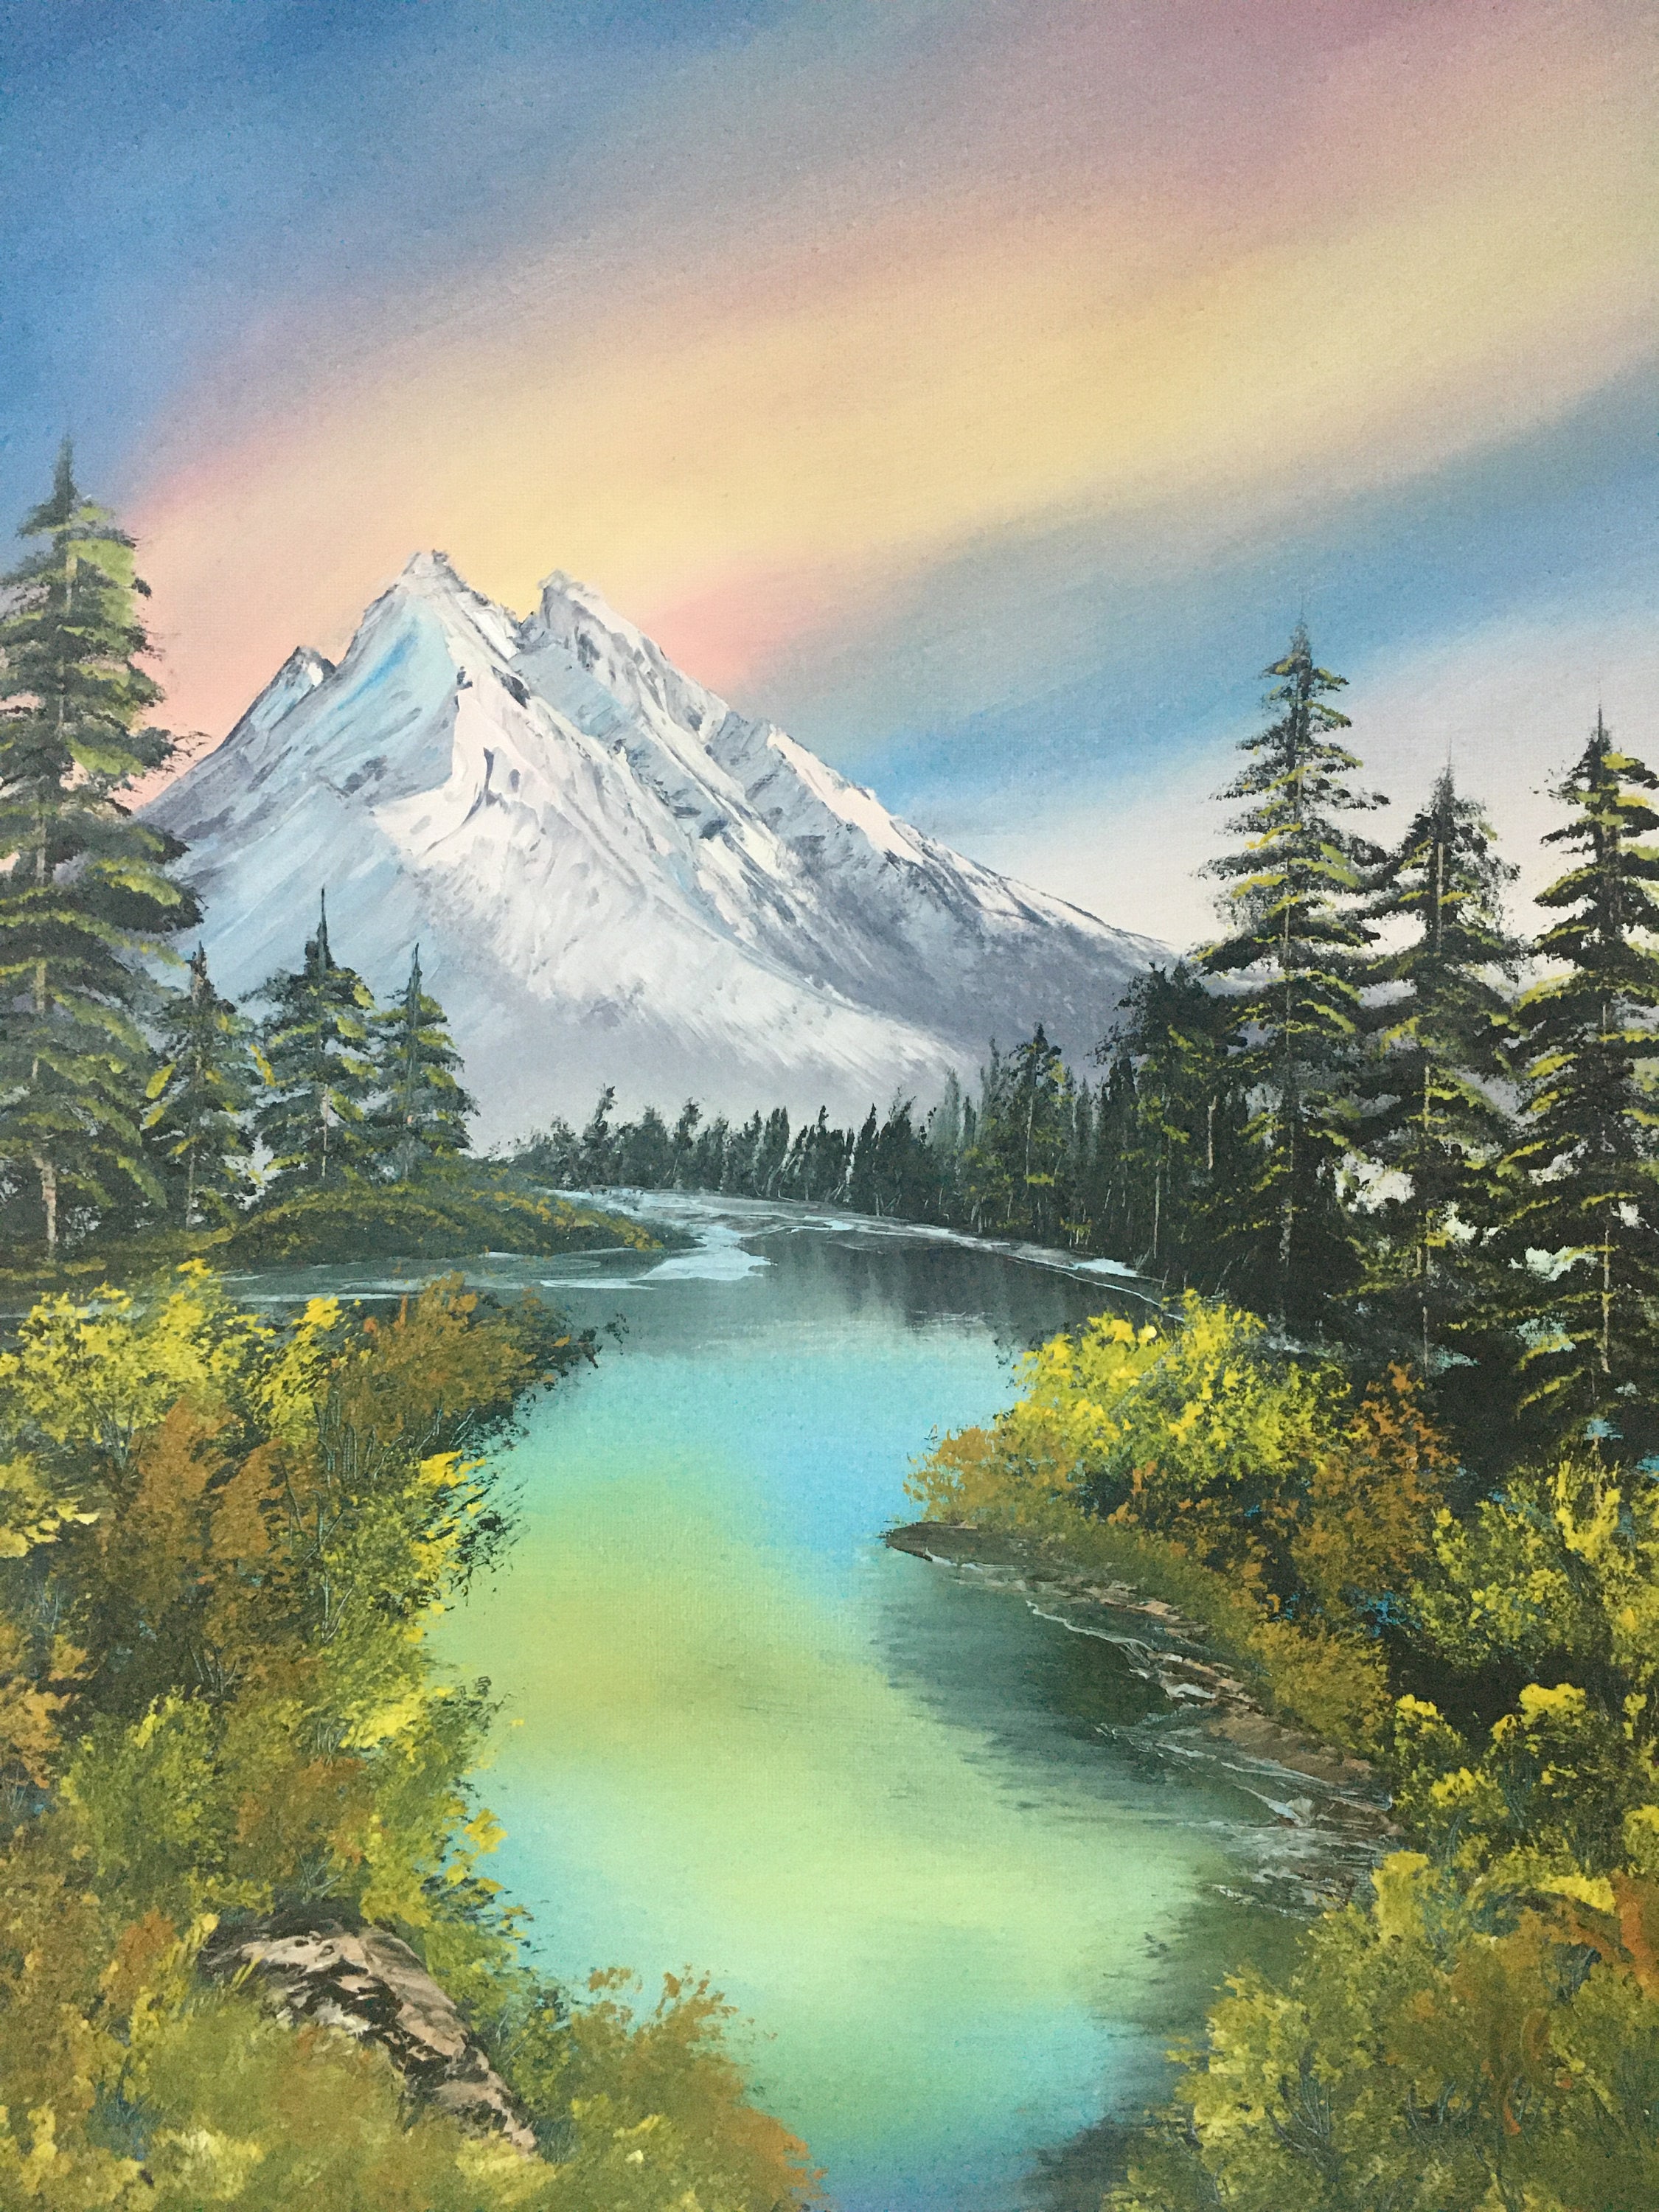 Most Expensive Bob Ross Paintings - Bob Ross Painting Values